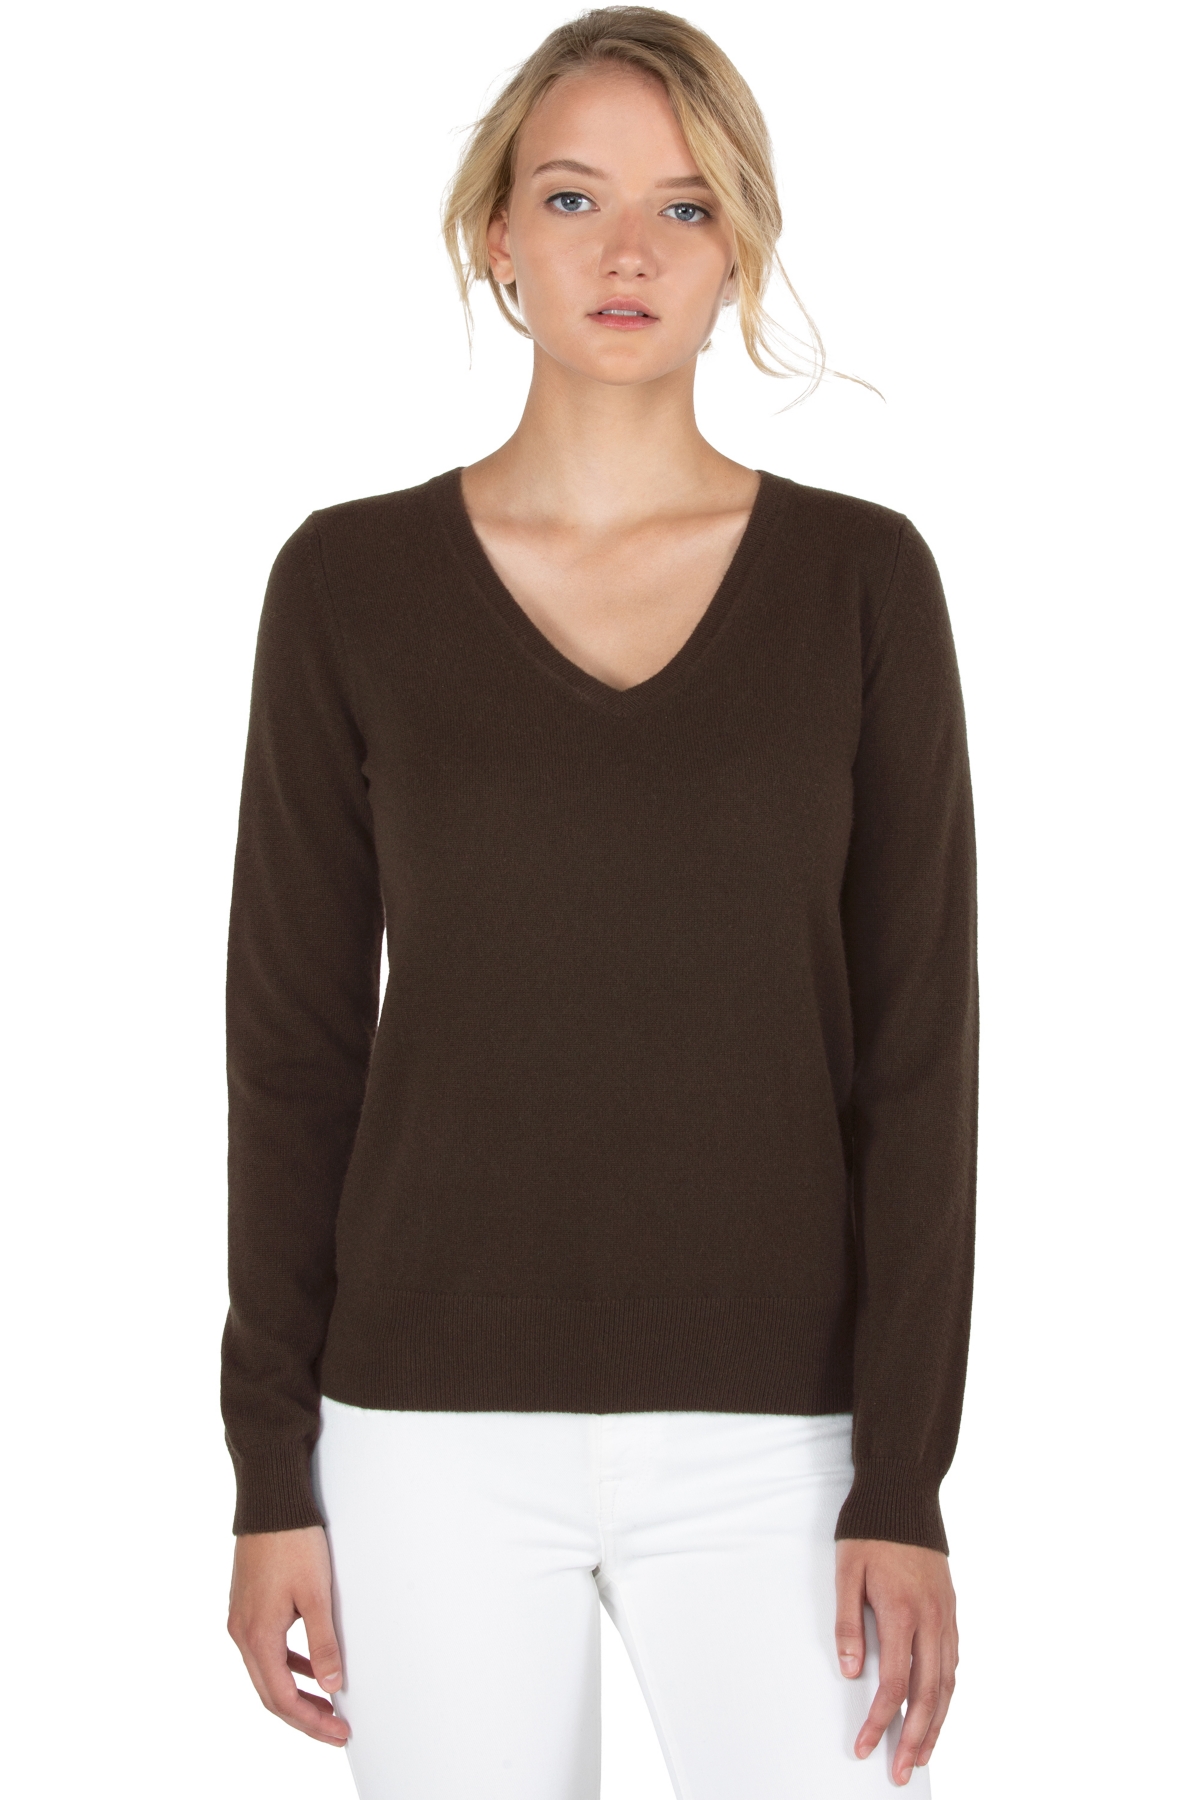 Women's 100% Pure Cashmere Long Sleeve Pullover V Neck Sweater (8160, Lime, Large ) - Orchid